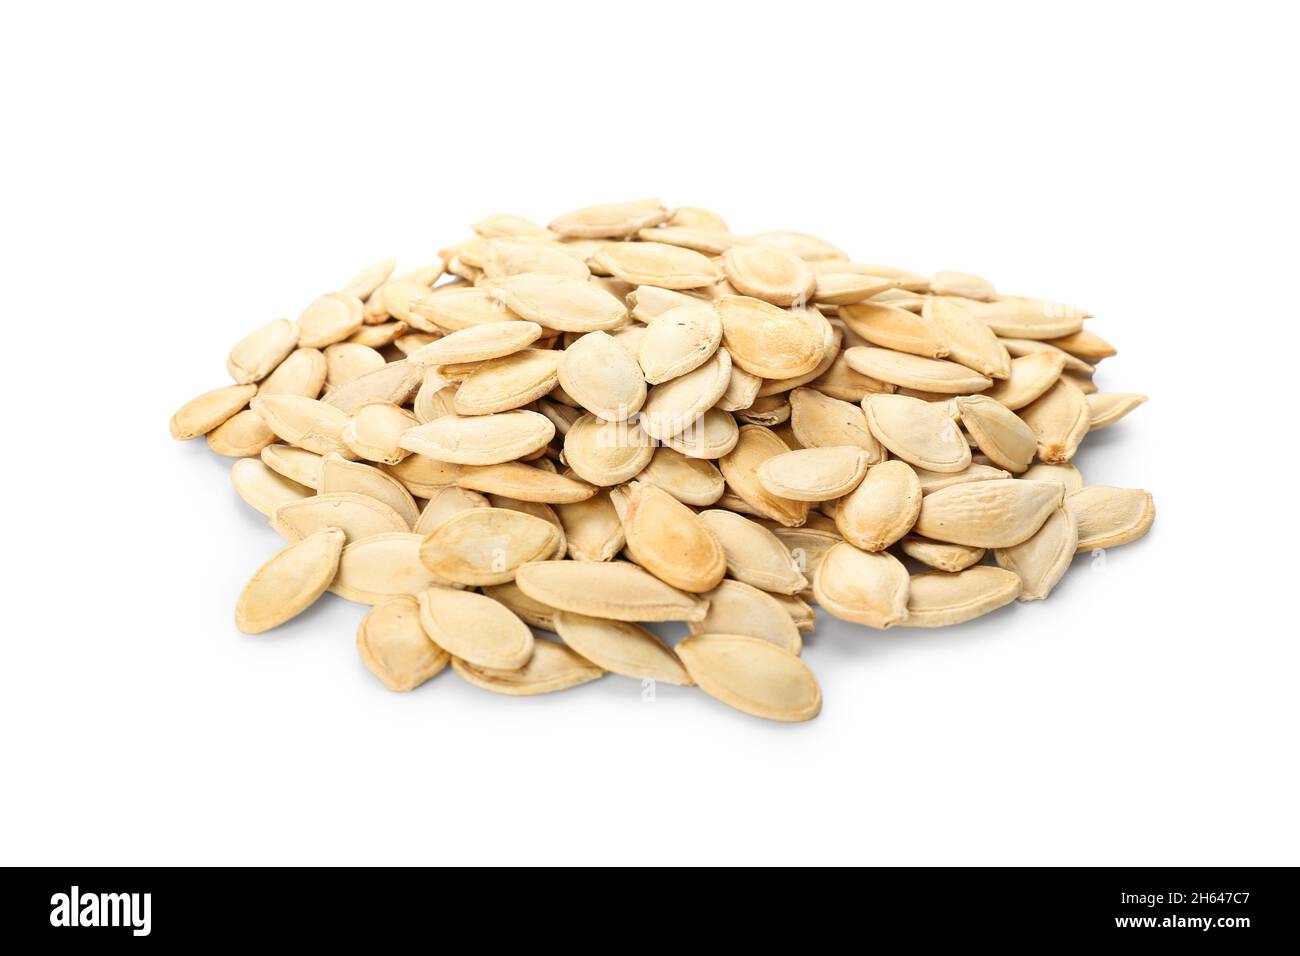 Heap of pumpkin seeds on white background Stock Photo